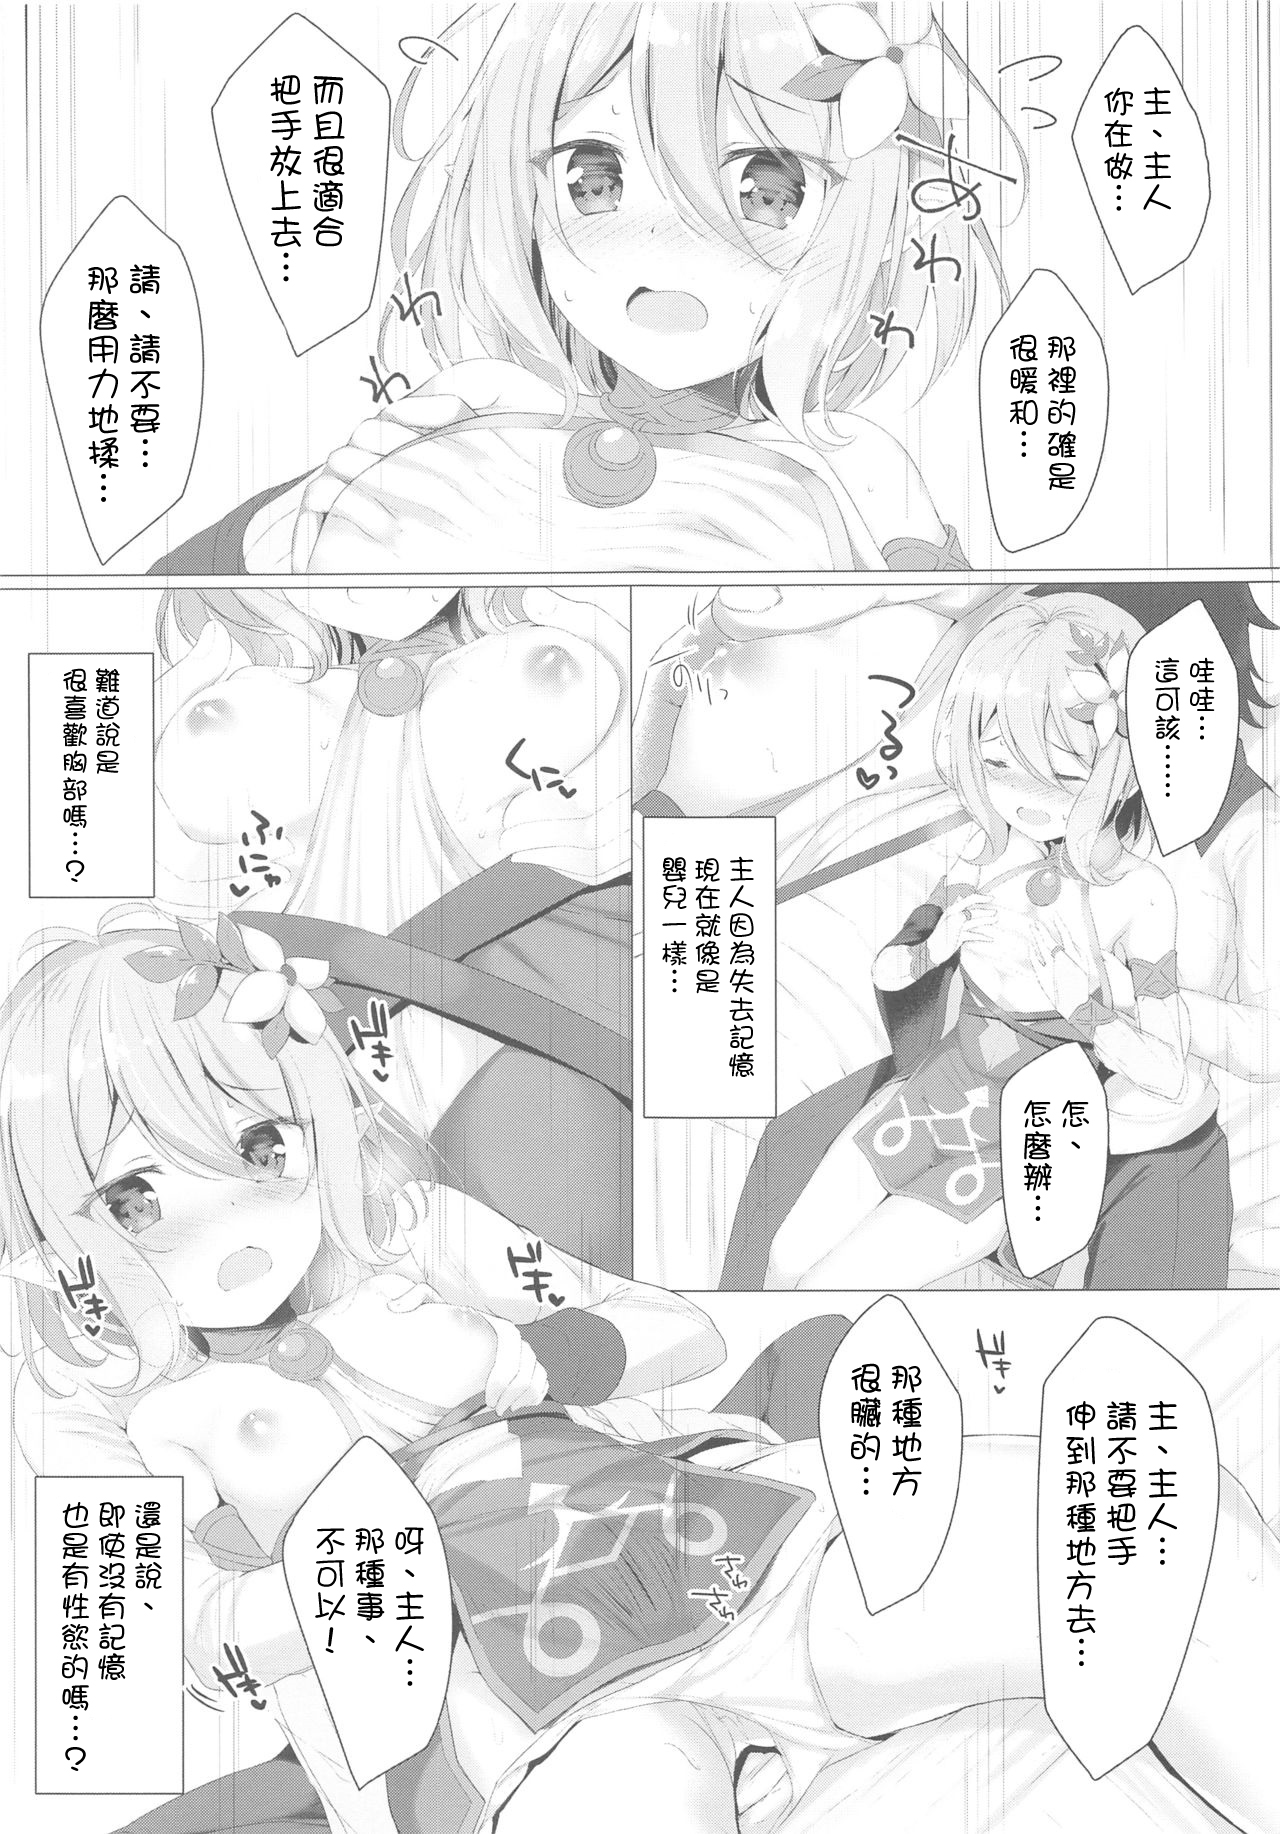 (SC2019 Autumn) [Twilight Road (Tomo)] Kokkoro-chan to Connect Shitai! (Princess Connect! Re:Dive) [Chinese] [一色汉化组] page 4 full